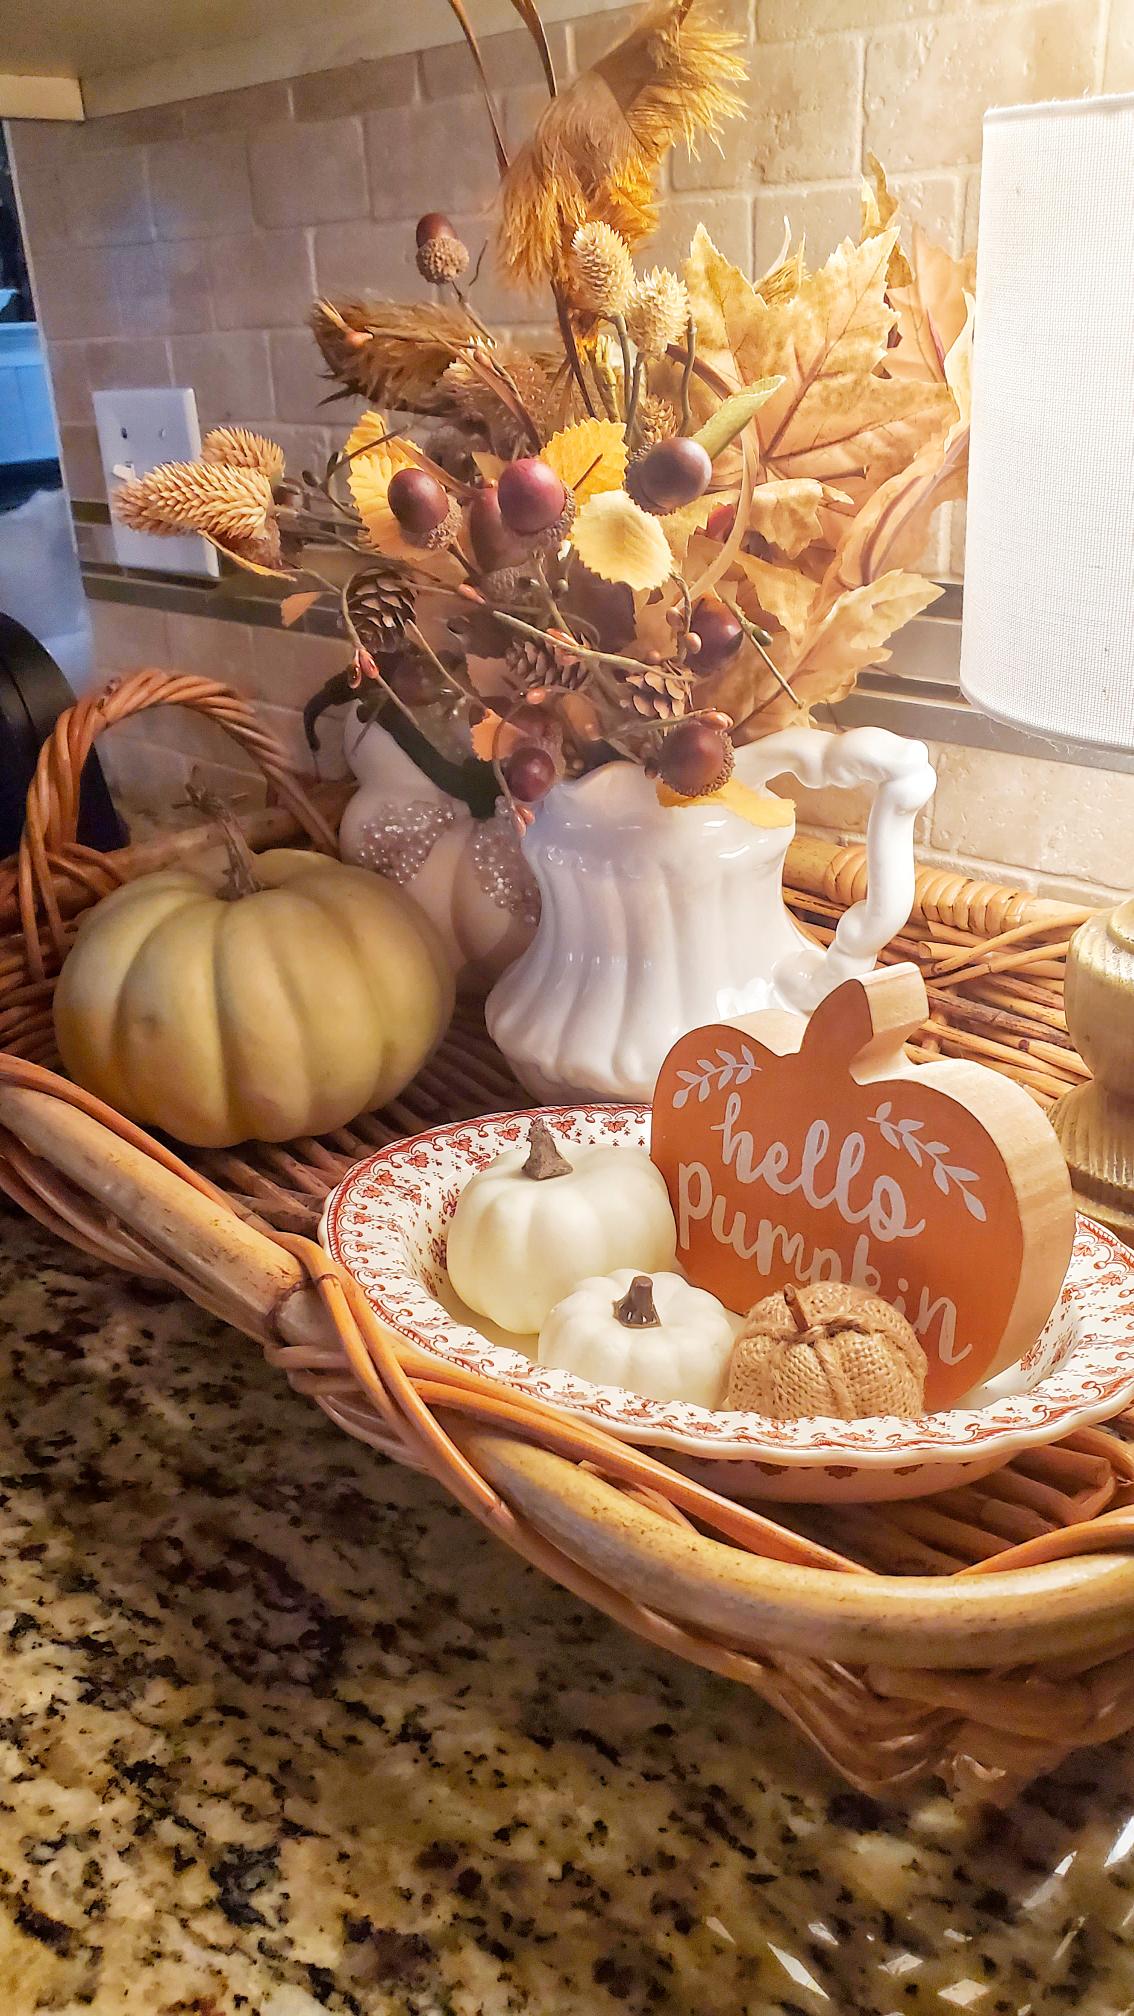 In a basket on top of our kitchen counter is a bouquet of flowers, pumpkins and a "hello fall" sign.